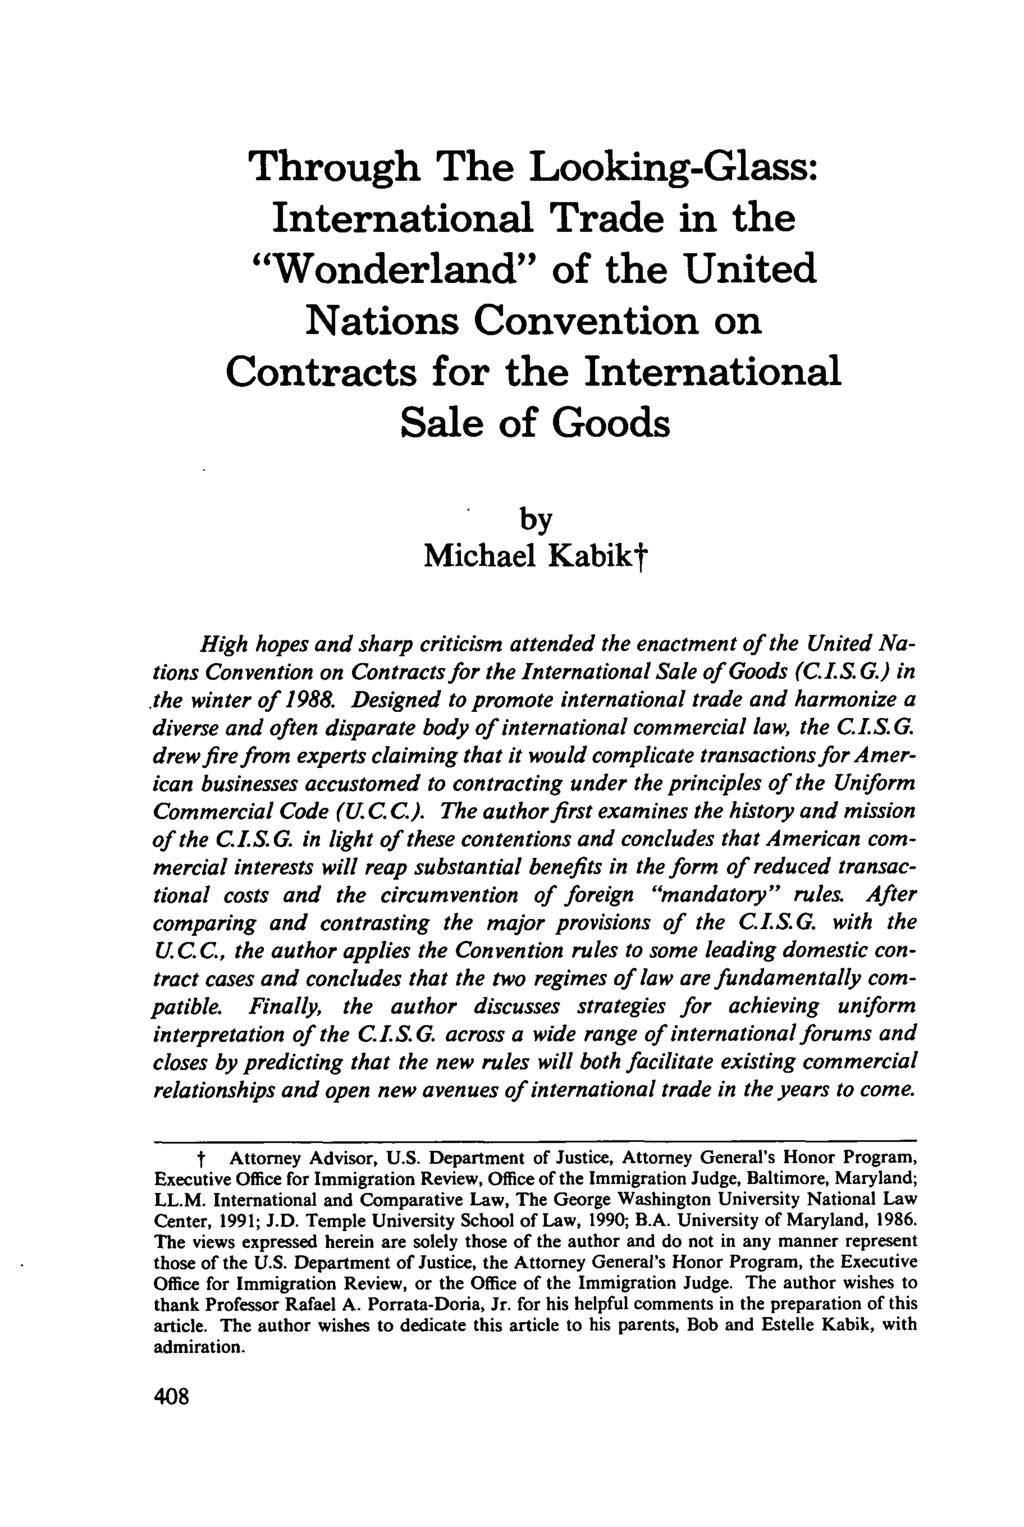 Through The Looking-Glass: International Trade in the "Wonderland" of the United Nations Convention on Contracts for the International Sale of Goods by Michael Kabikt High hopes and sharp criticism